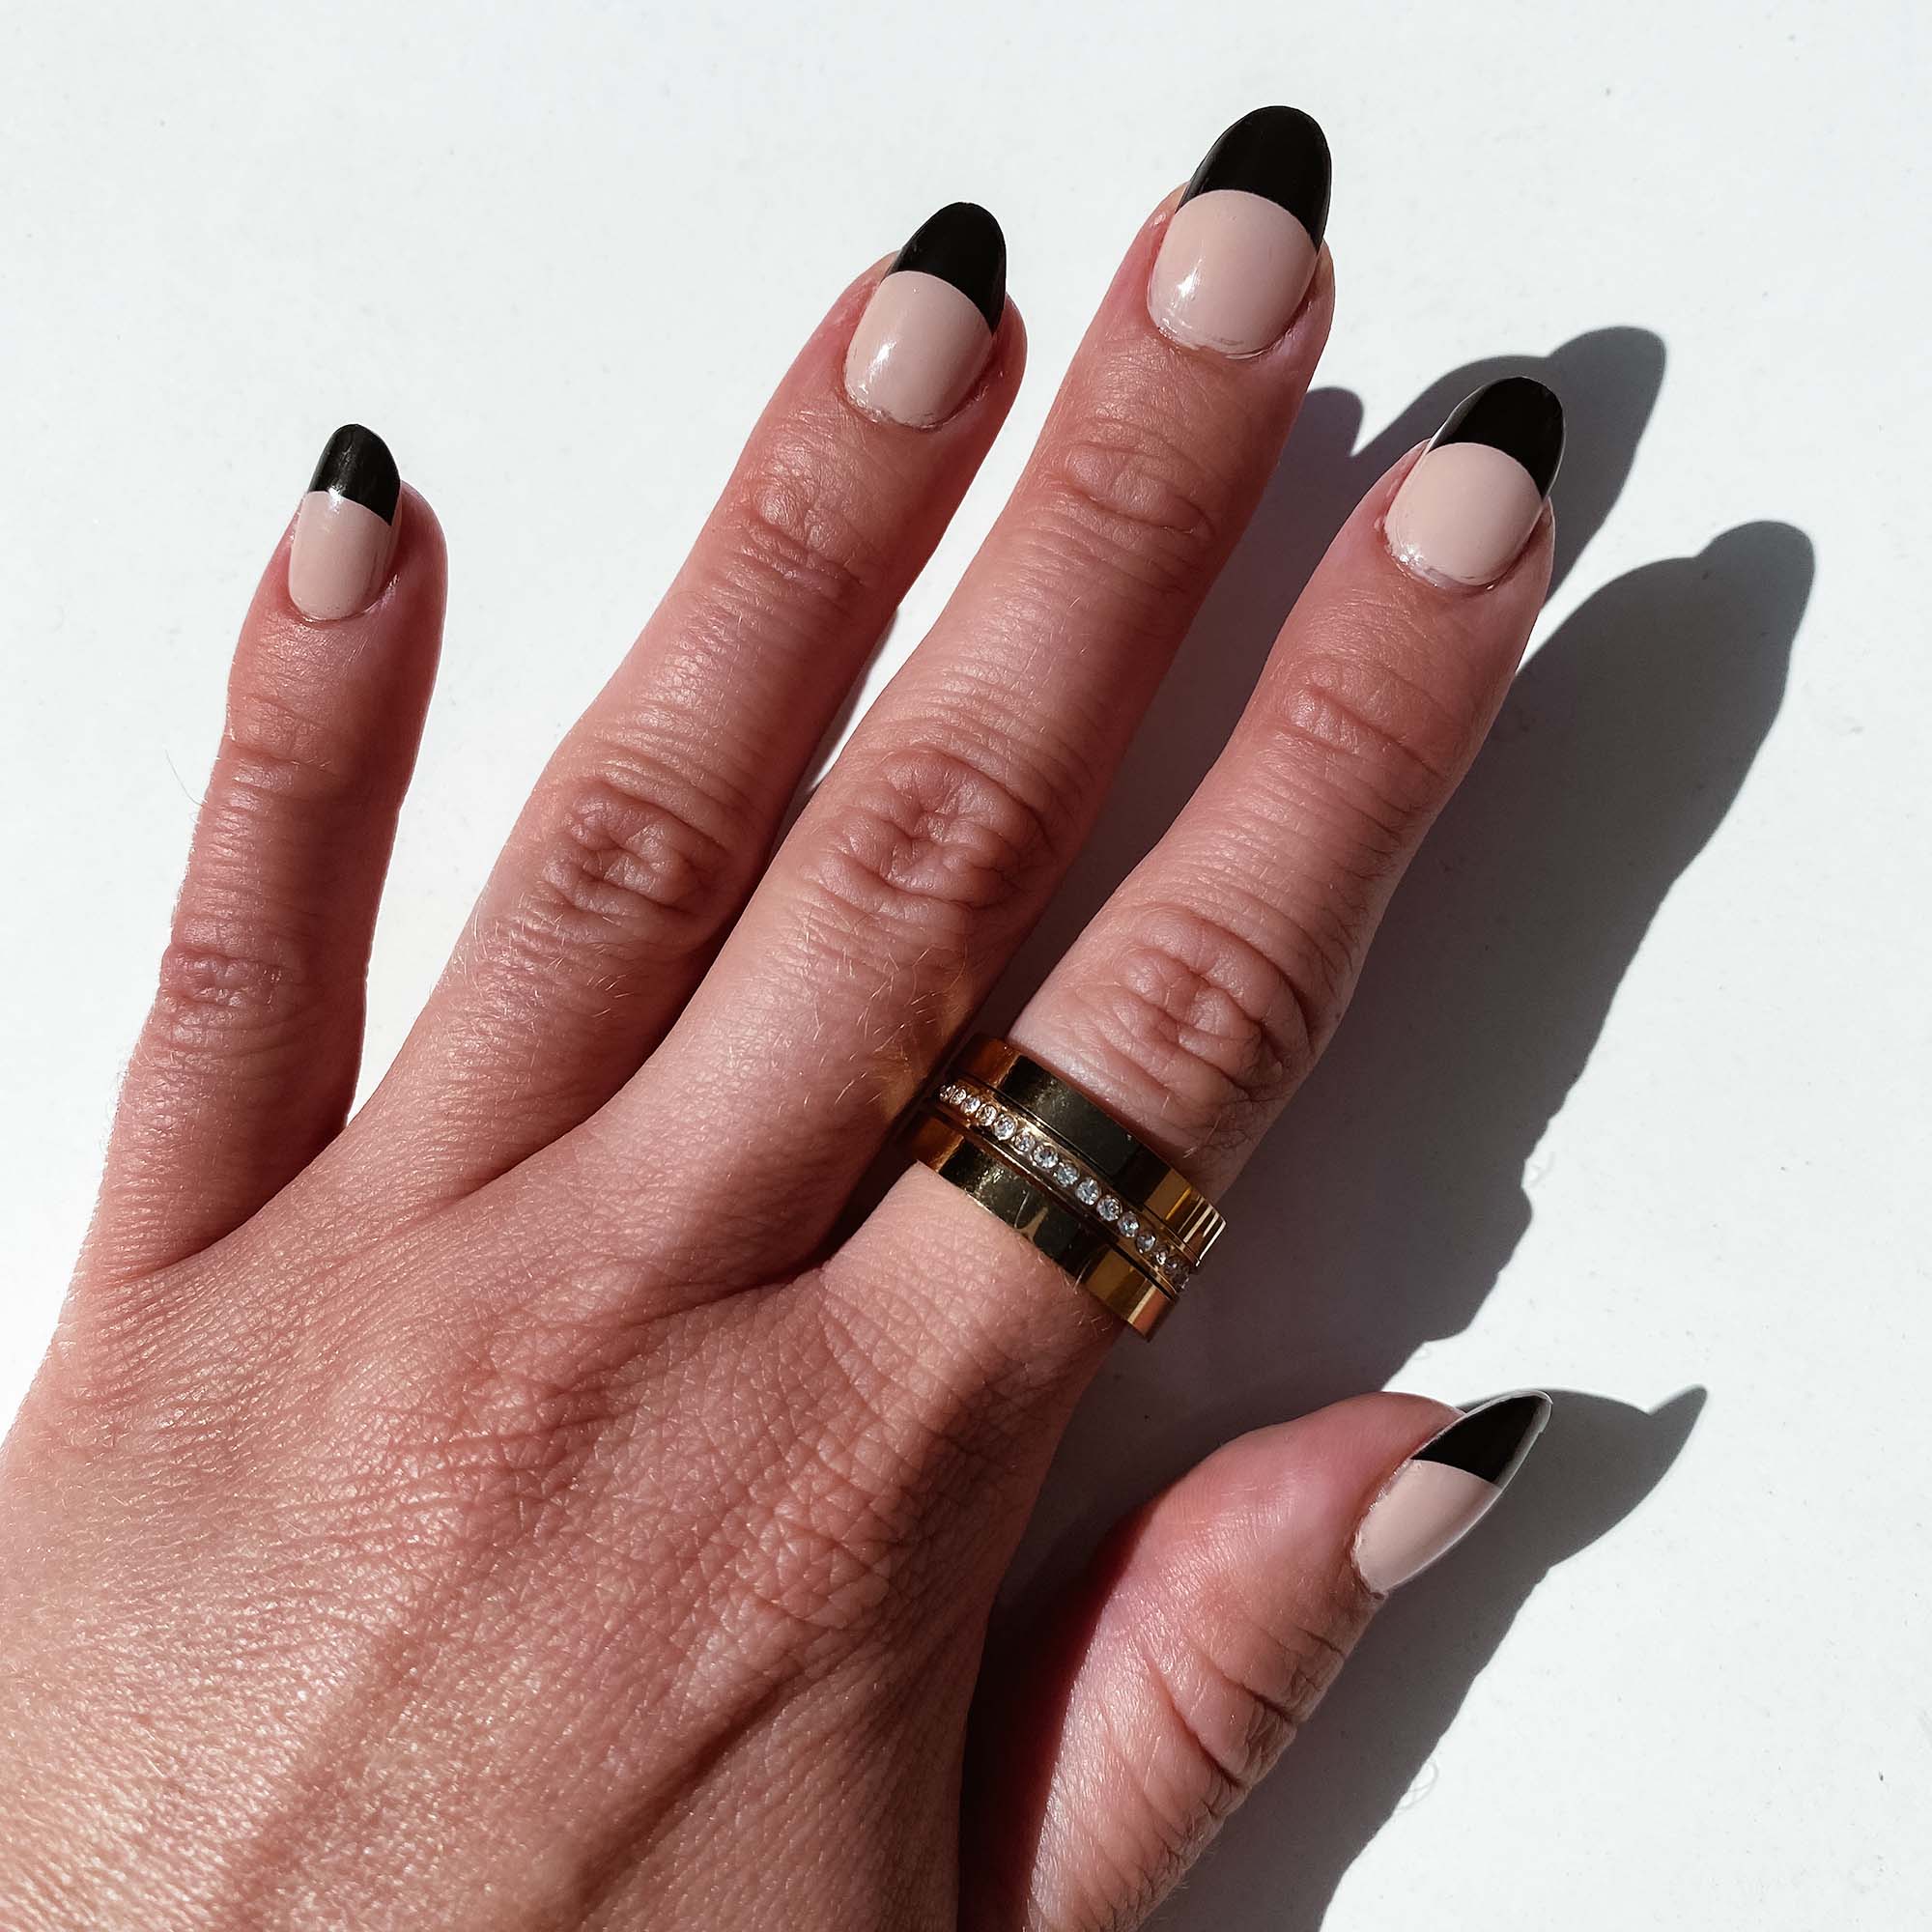 Black French Tip Nails